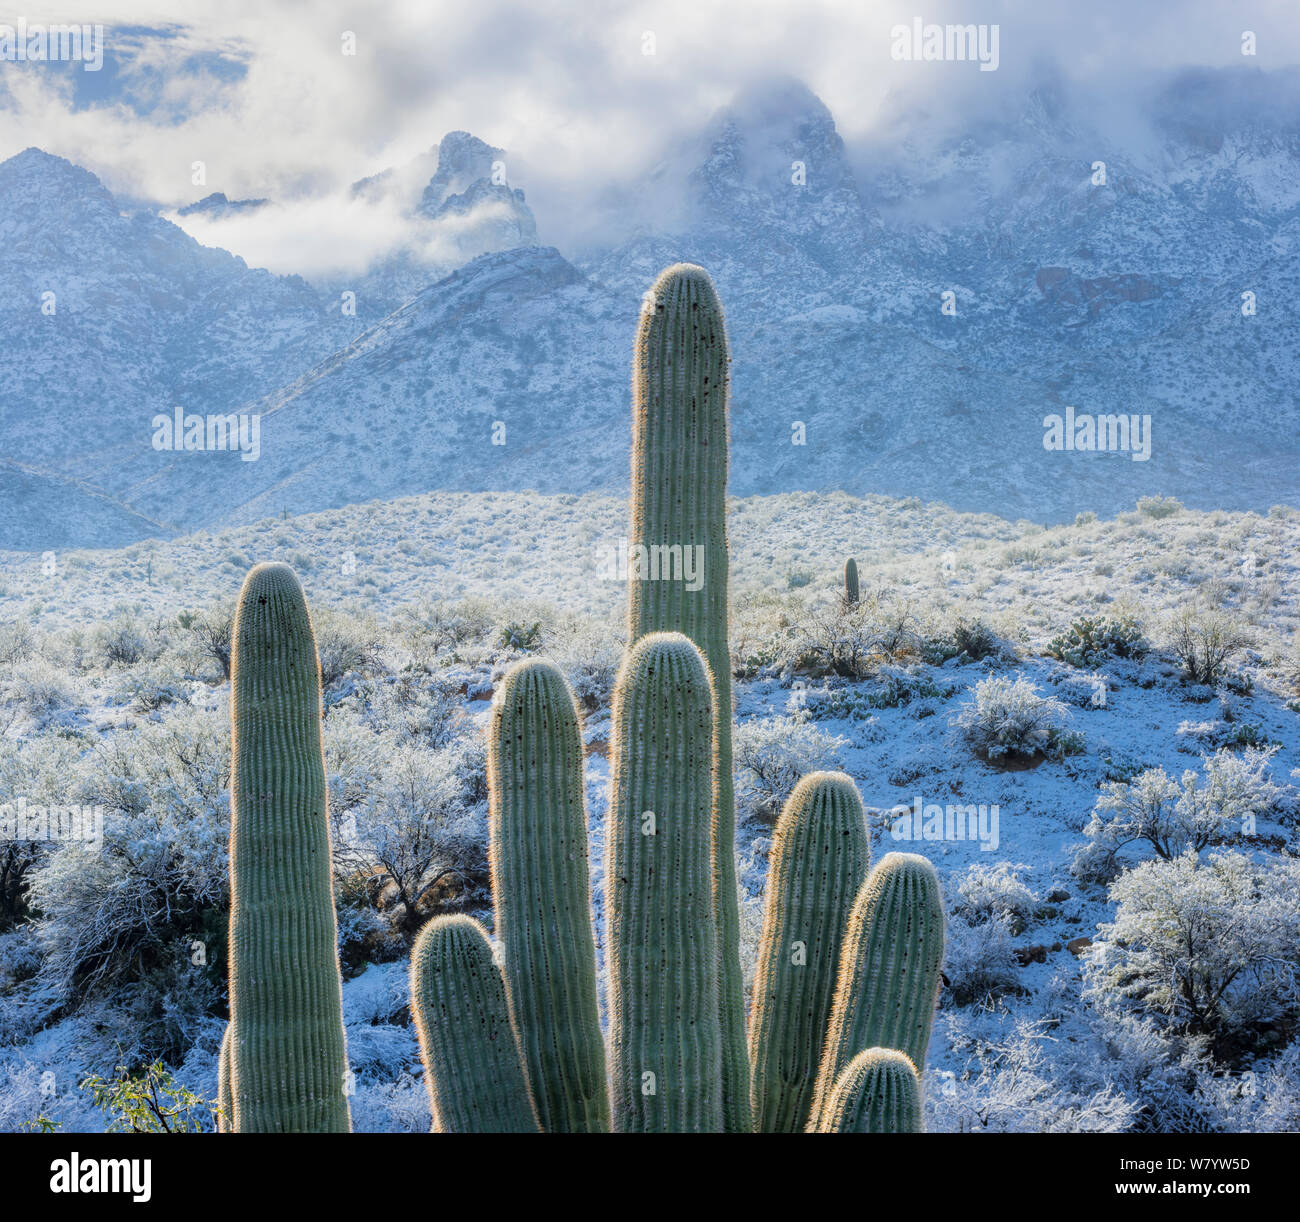 View east from Catalina State Park, with snow covered Saguaro cacti (Carnegiea gigantea) with Cholla (Cylindropuntia) with Santa Catalina Mountains in the background. Arizona, USA, January 2015. Stock Photo